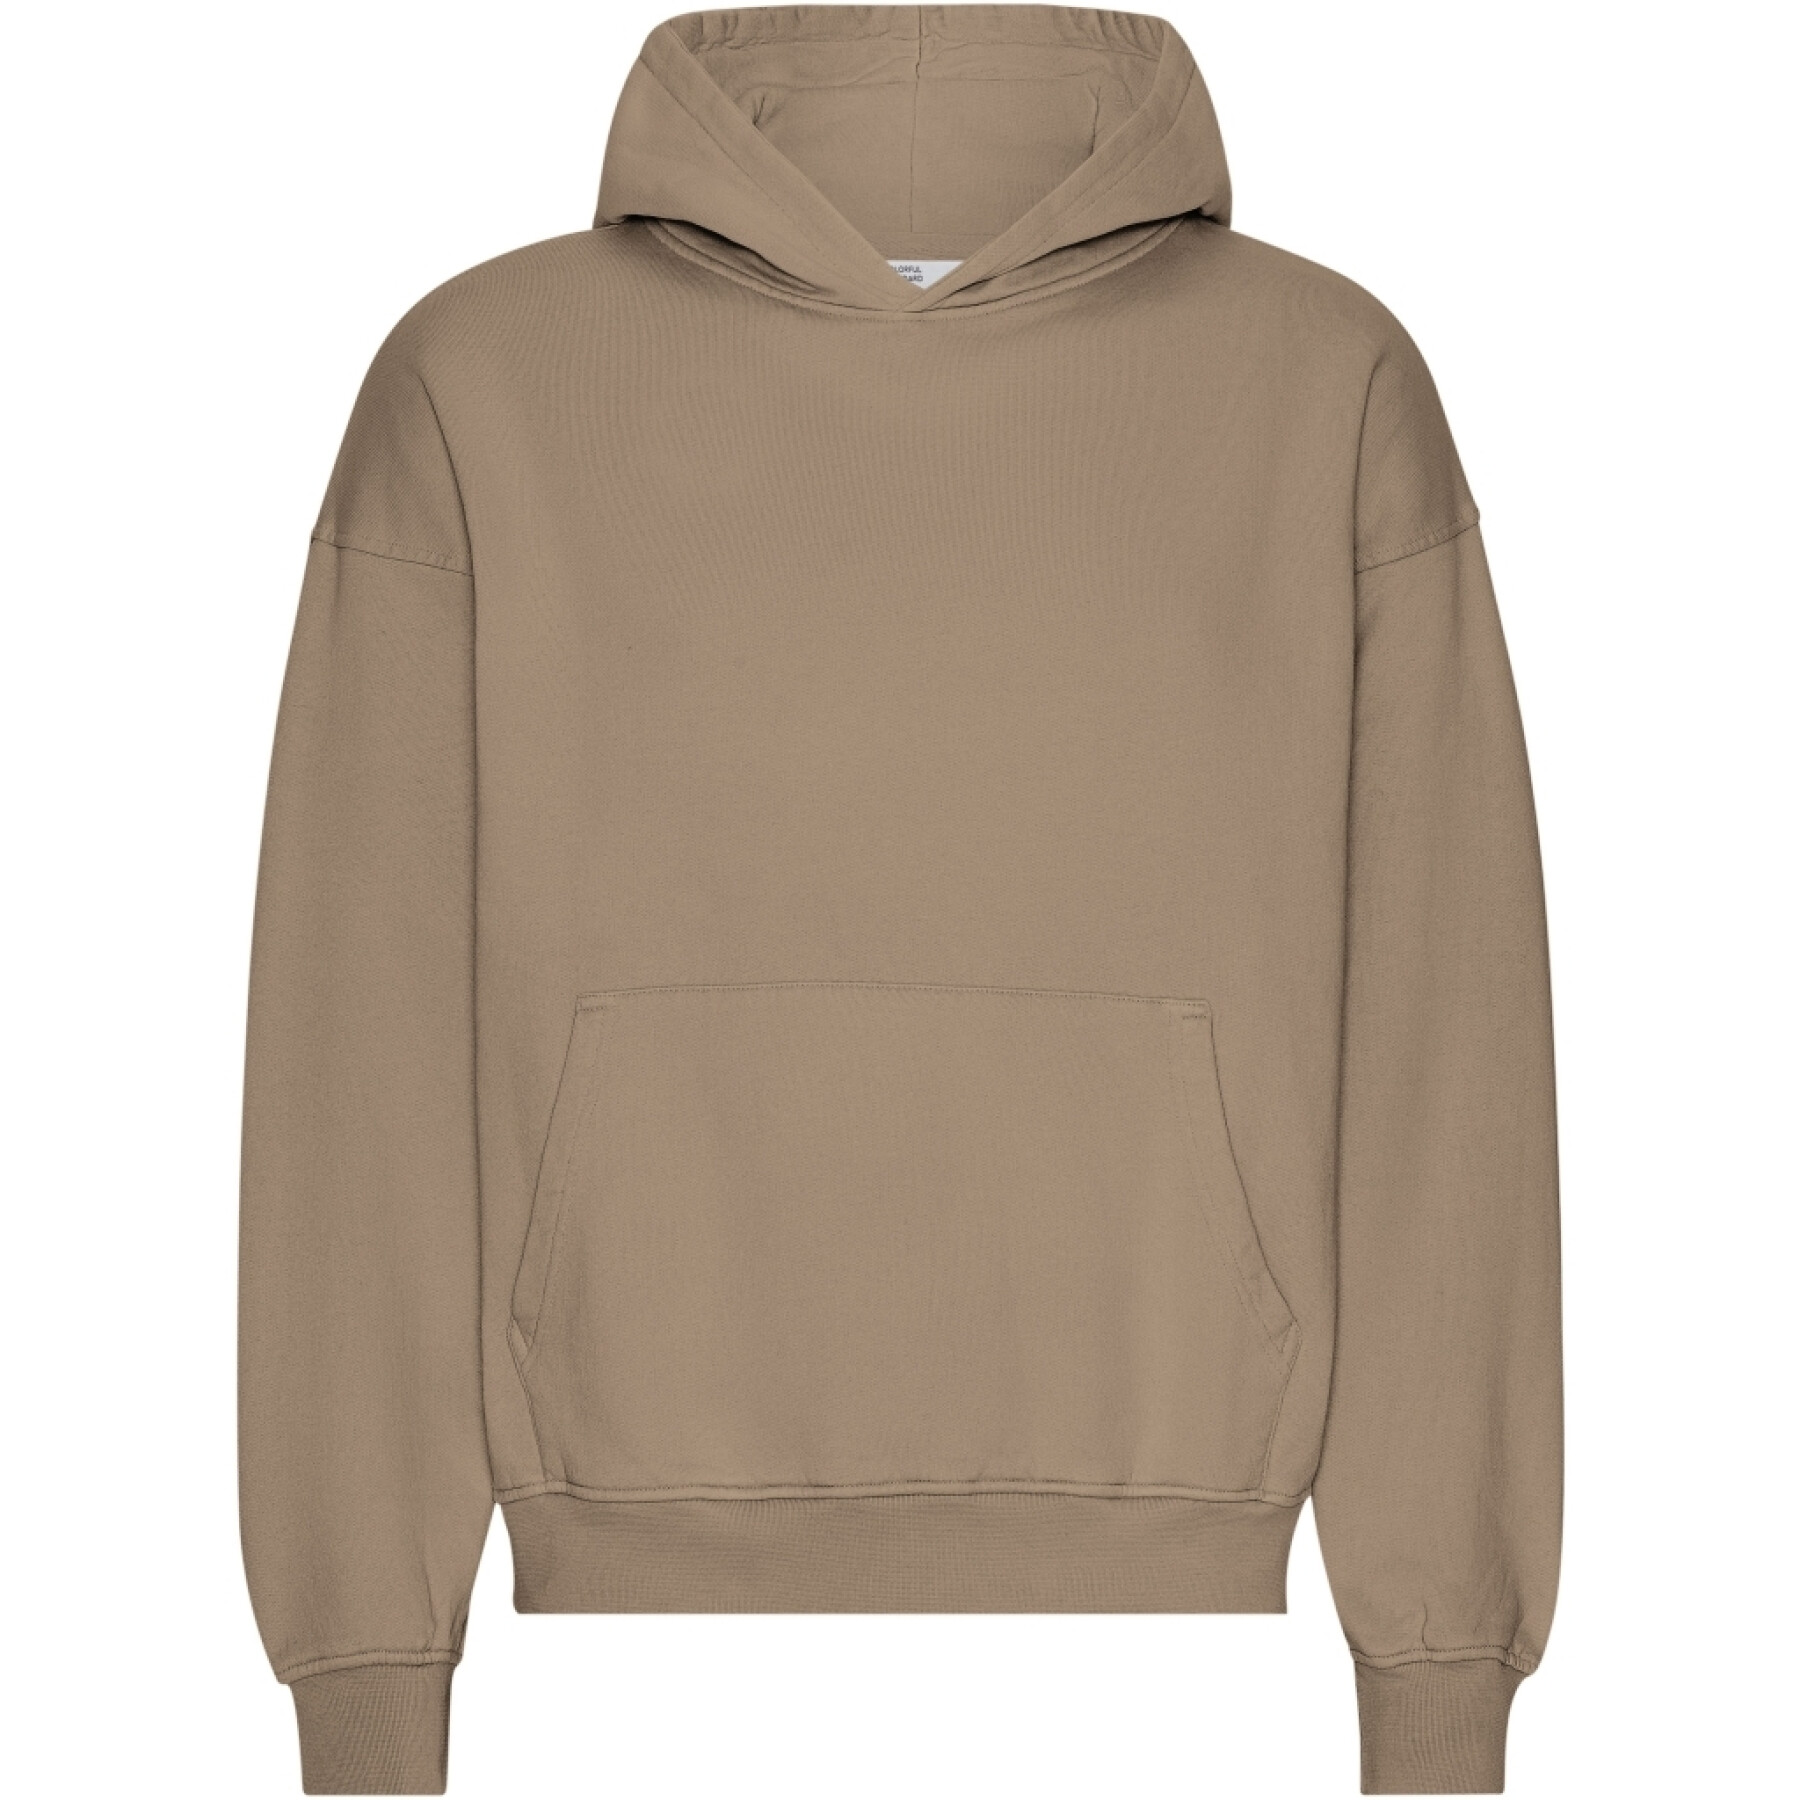 Oversized Hoodie Colorful Standard Organic Warm Taupe